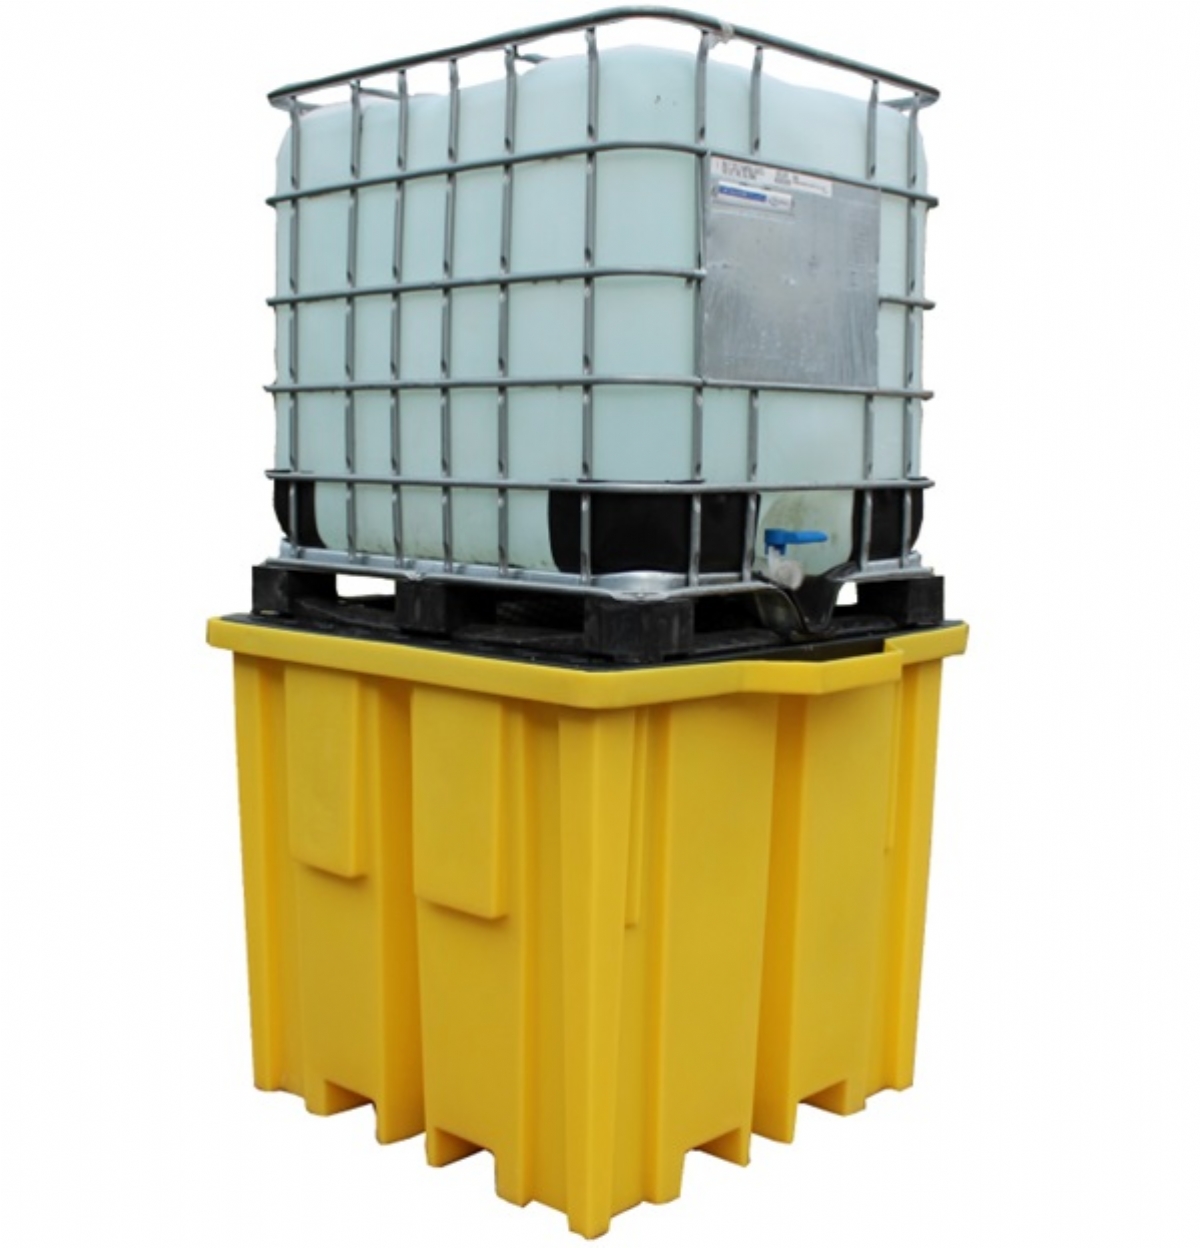 IBC Spill Pallet (With 4 Way For 1 x 1000ltr IBC)